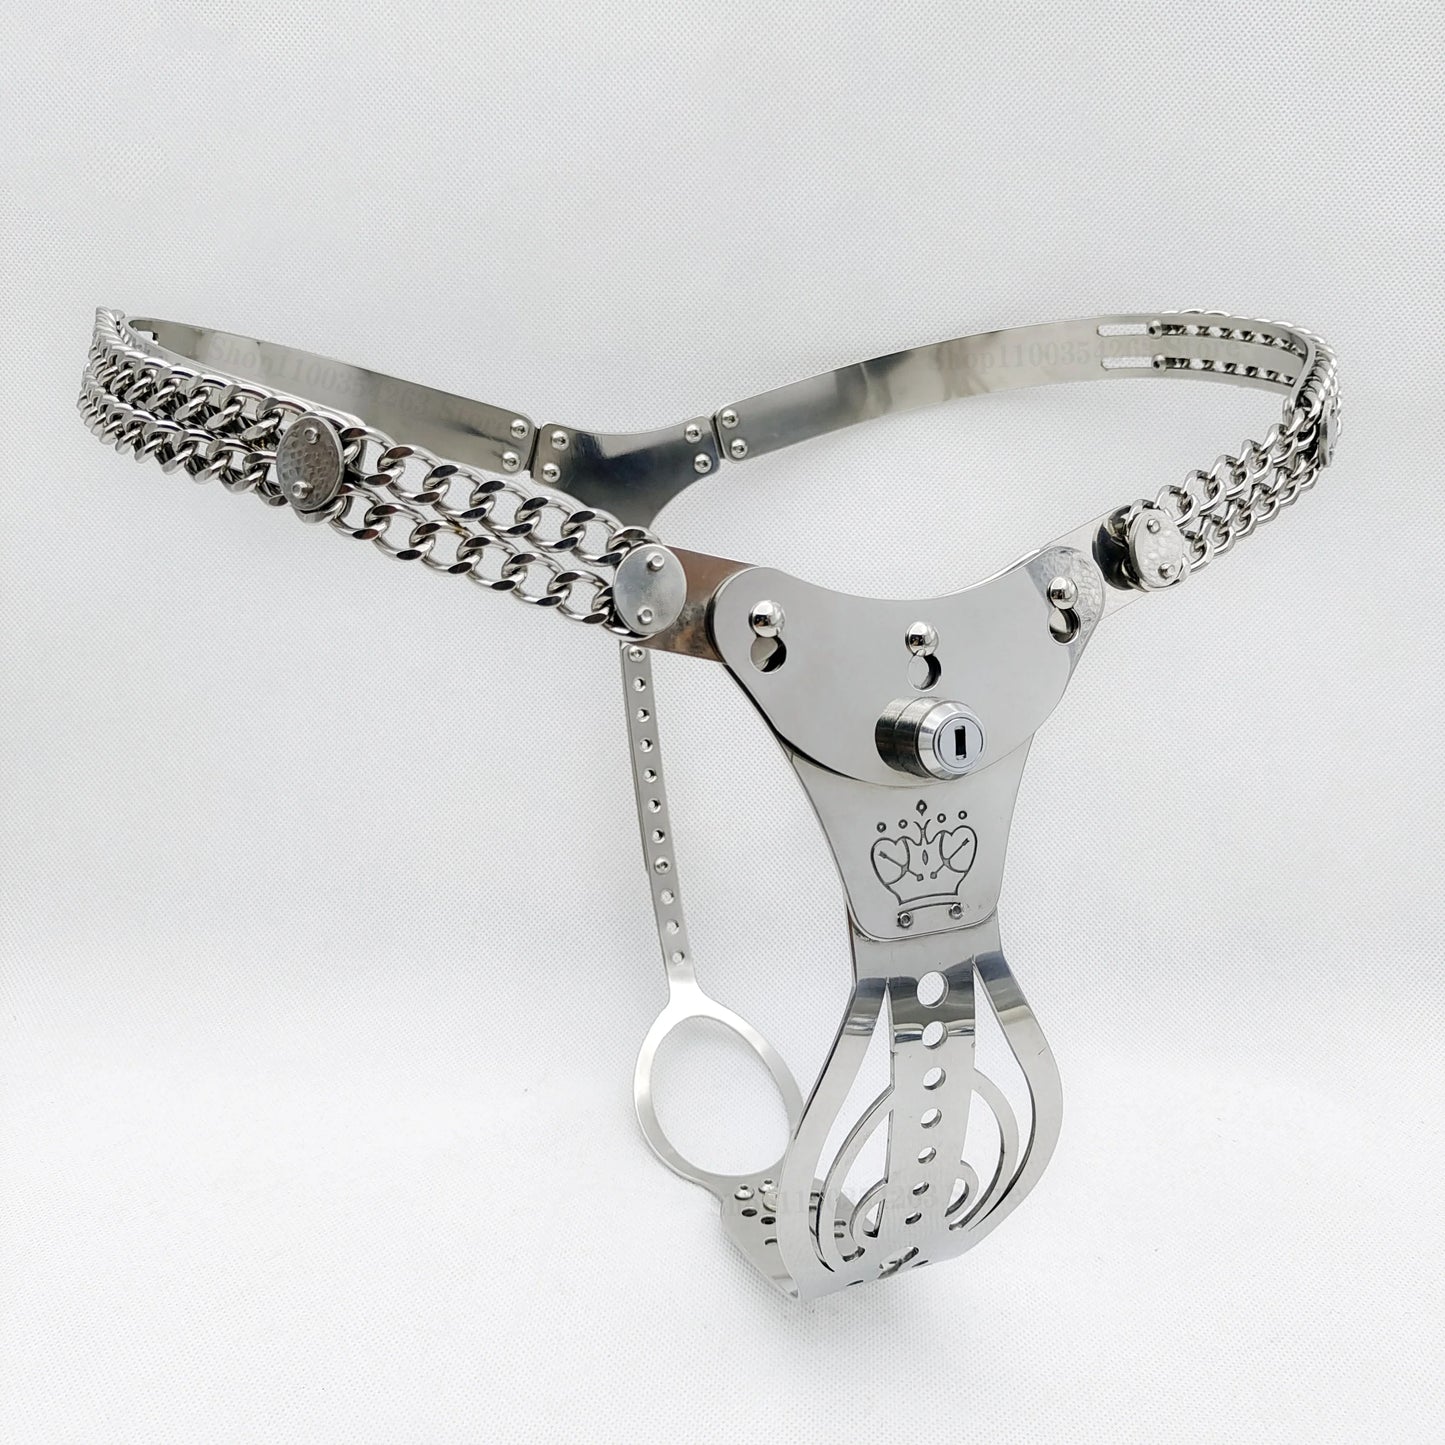 Metal Chastity Belt For Women with Removable Viginal and Anal Plugs - KeepMeLocked